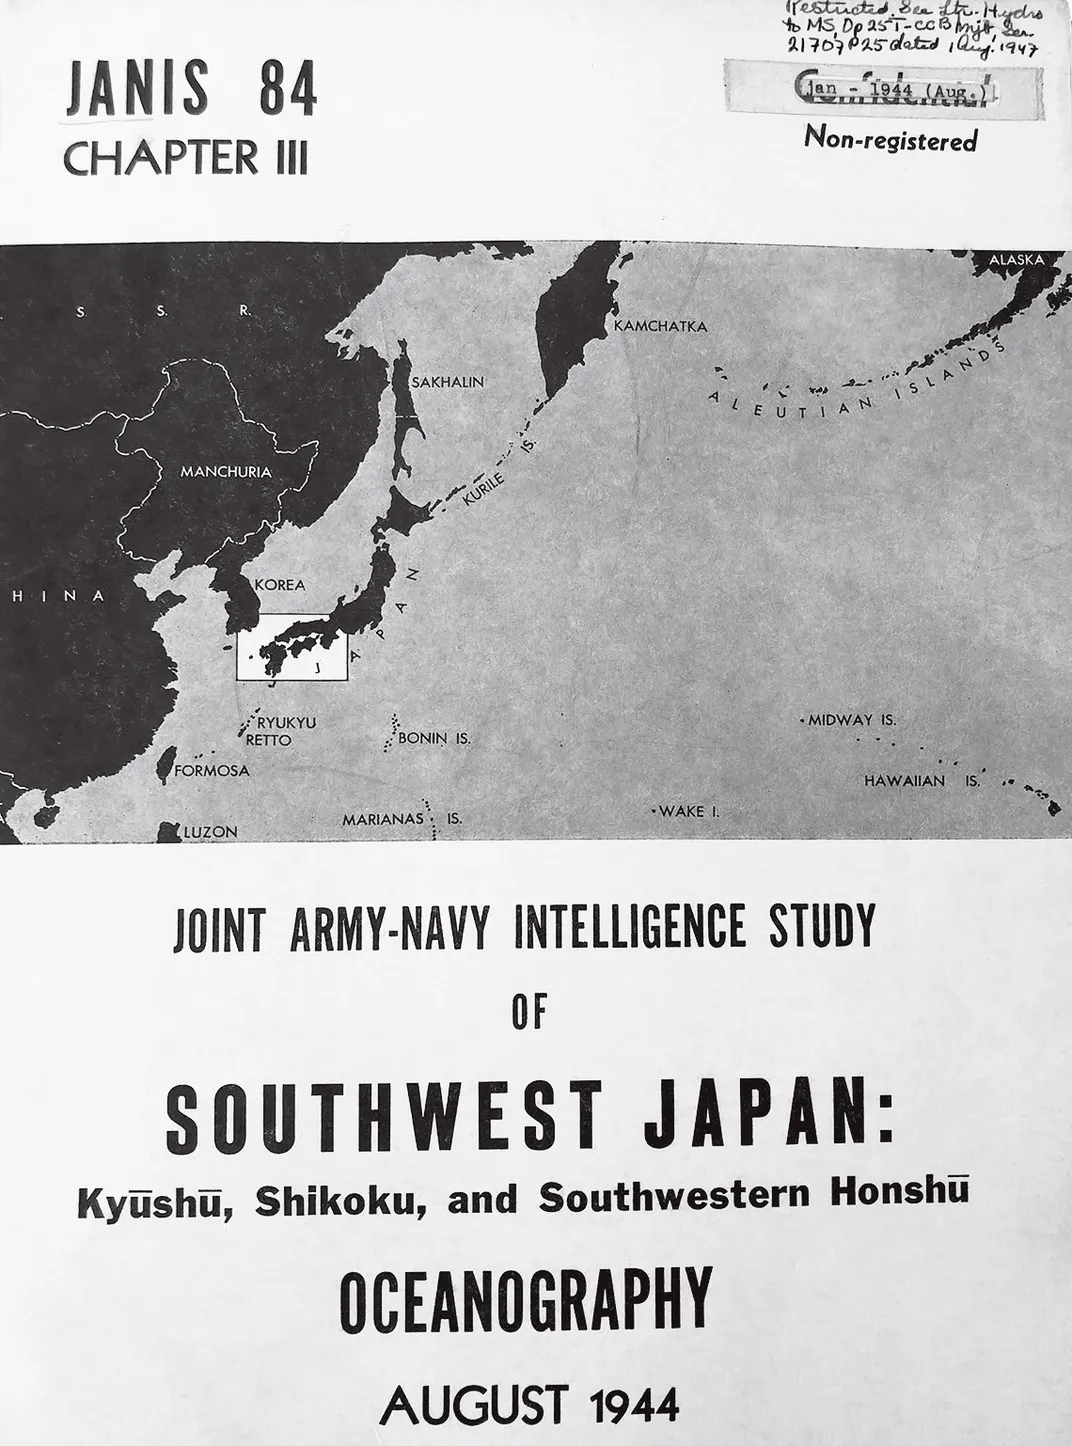 on book cover showing the ocean near Japan